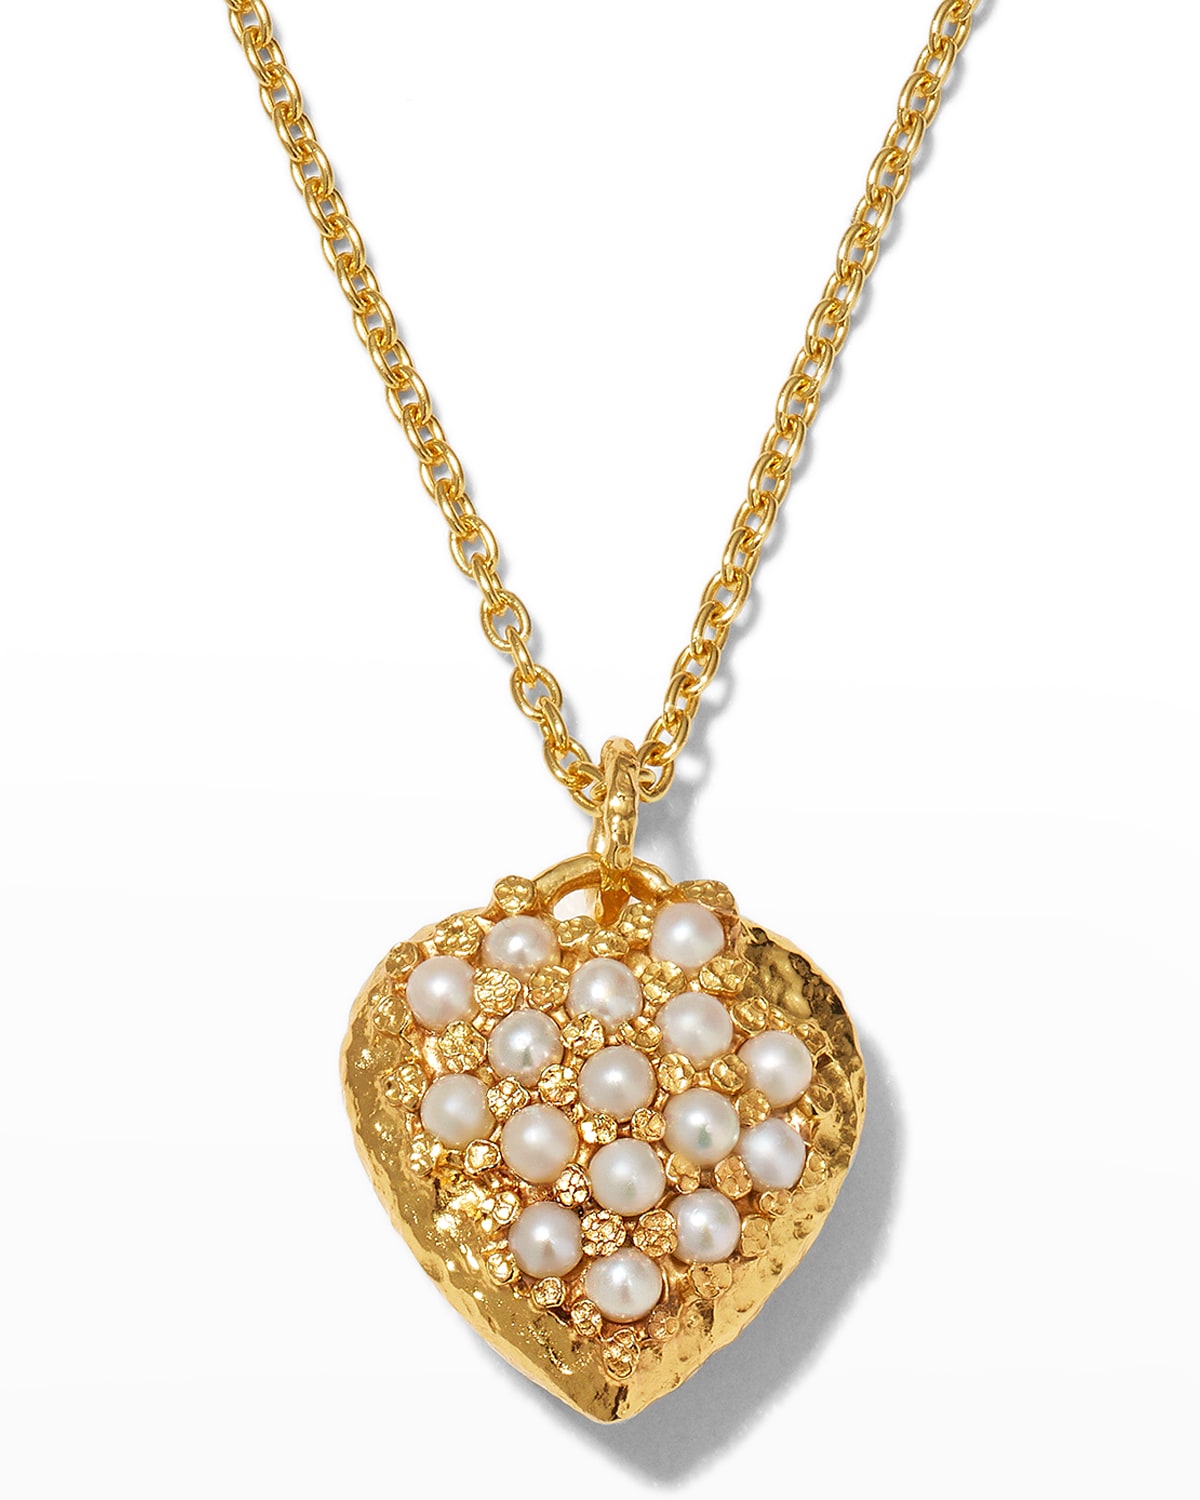 Pacharee Floret Heart Necklace In Gold